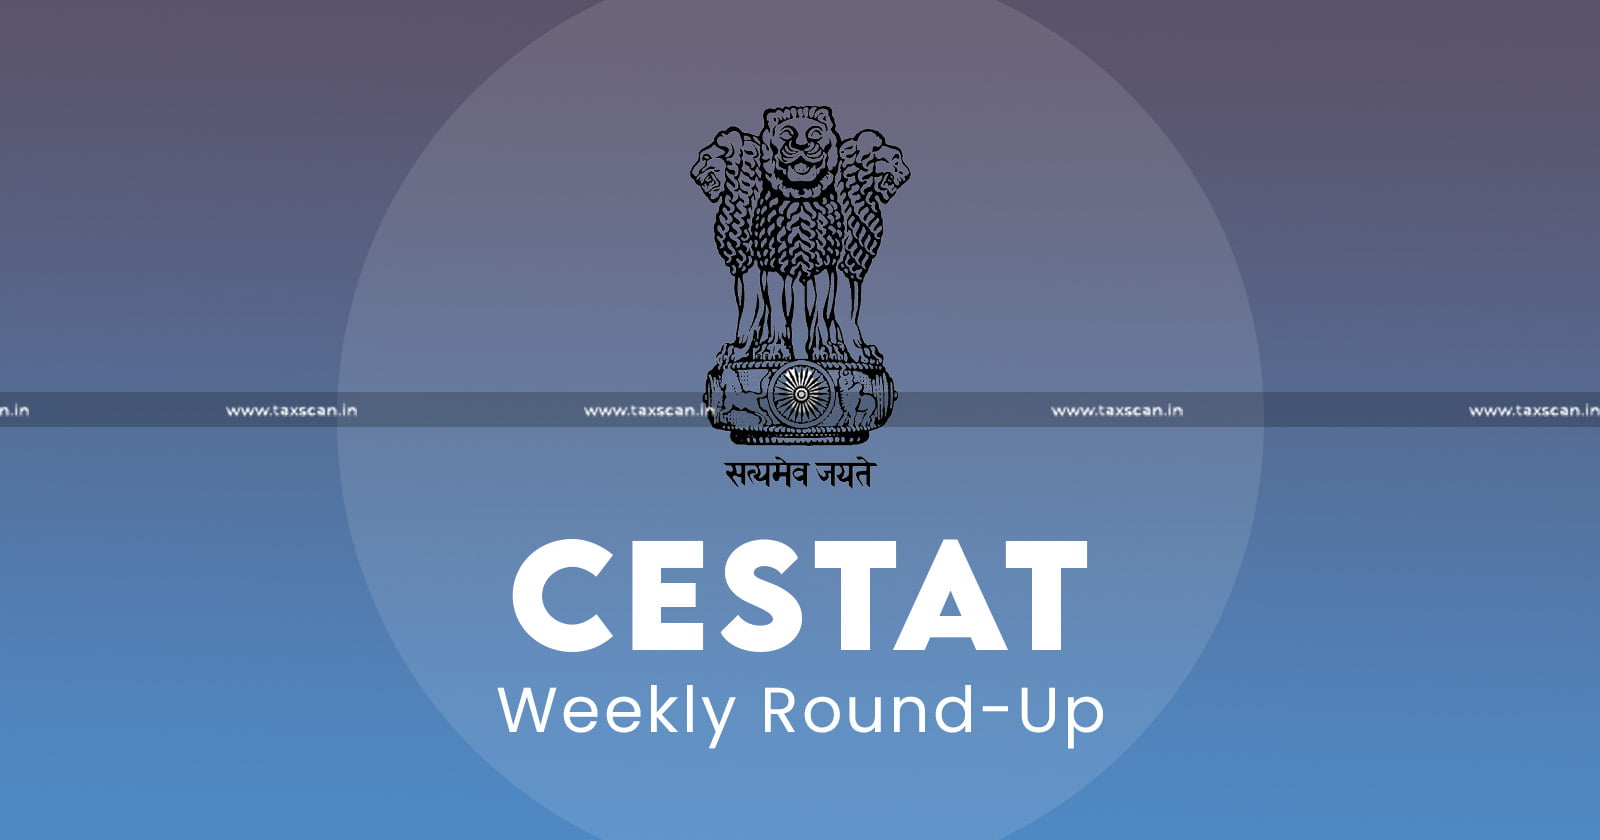 CESTAT Weekly Round-Up - Weekly Round-Up - CESTAT - Service Tax - Customs - Excise - taxscan